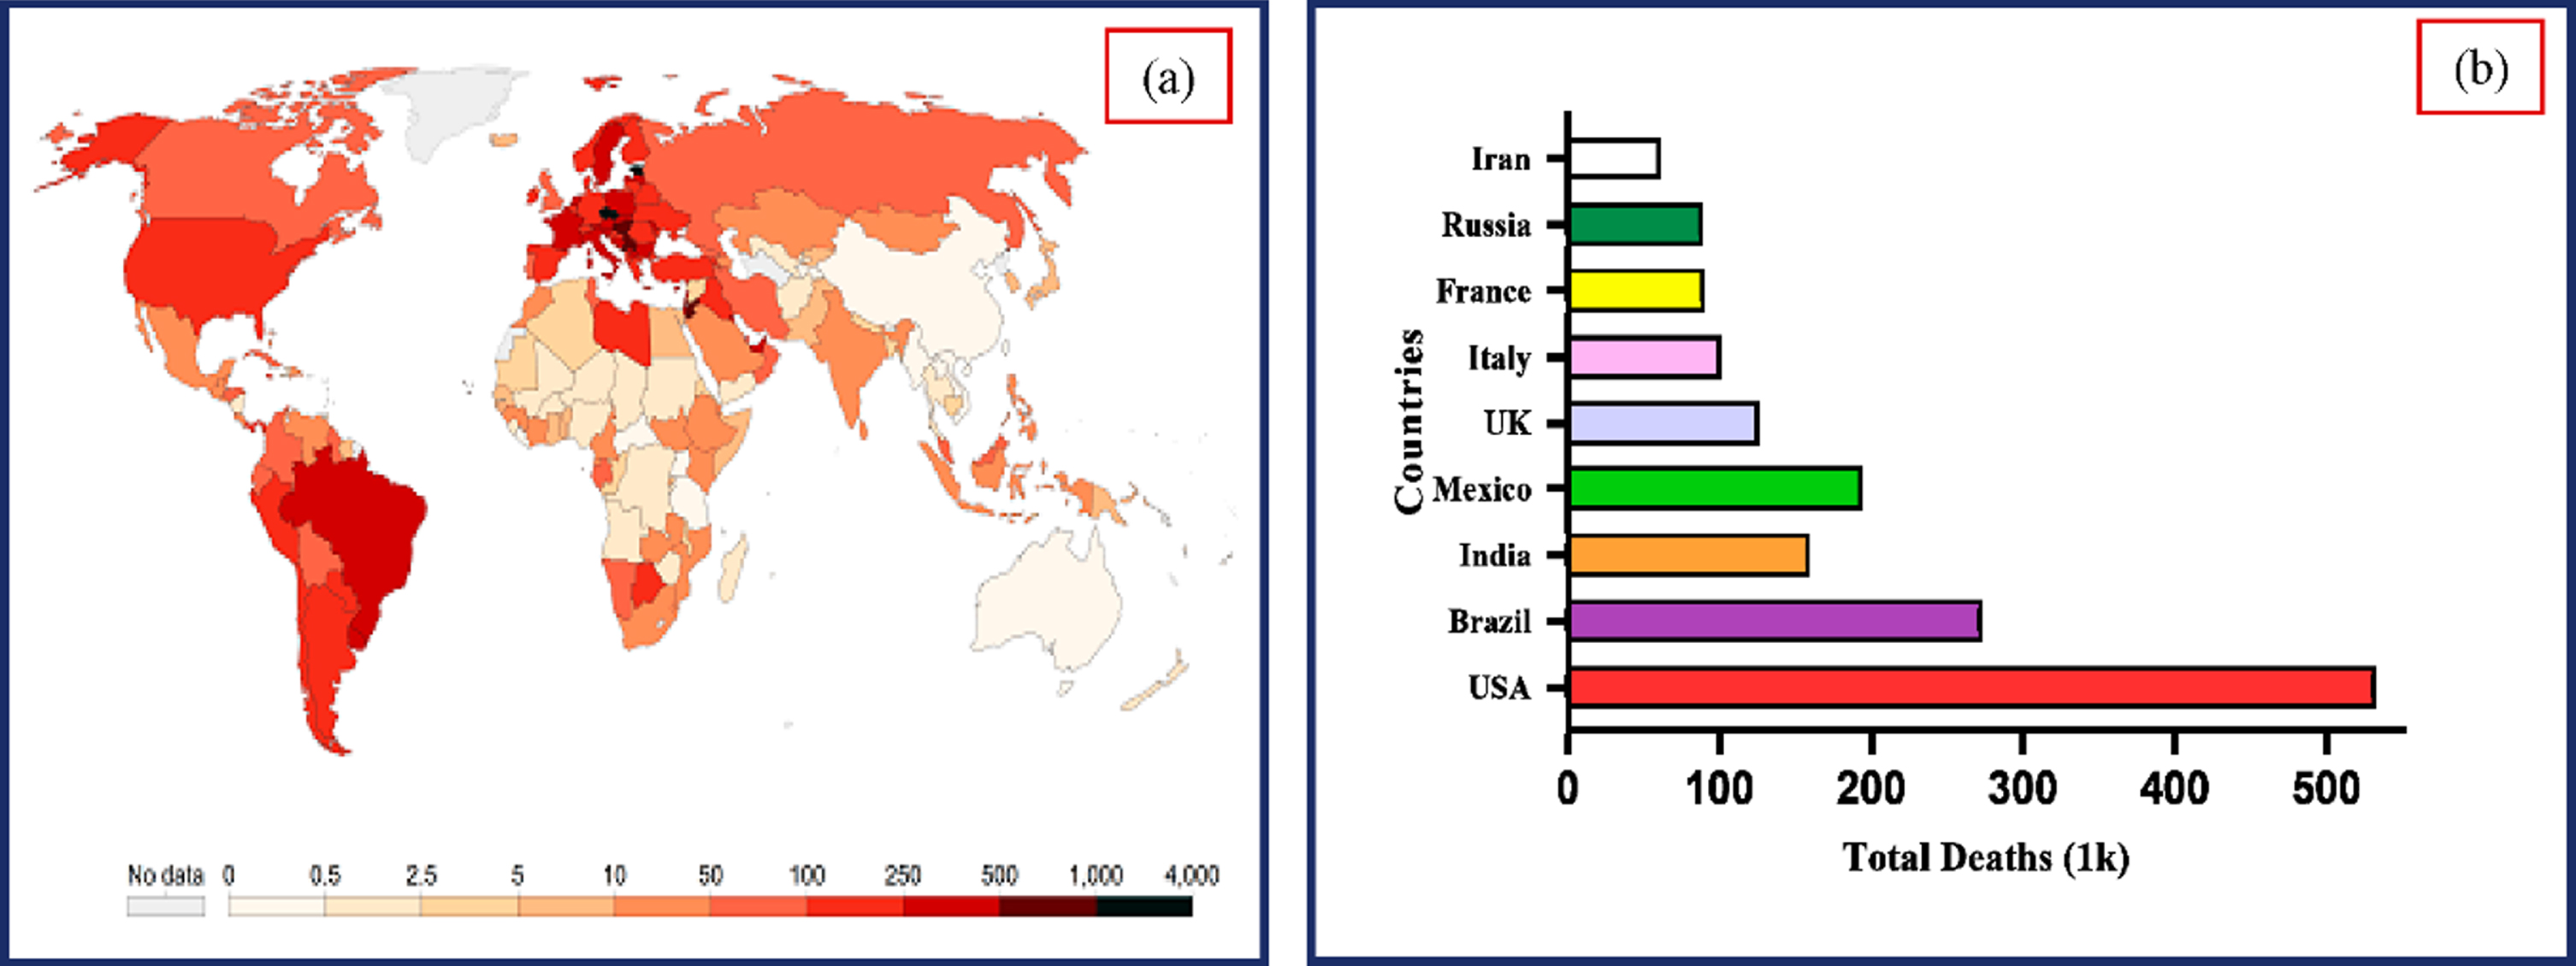 (a) Worldwide COVID-19 incidence map (b). Total COVID-19 deaths reported in various nations. (Source: Center for Systems Science and Engineering at Johns Hopkins University, Baltimore, MD, USA).